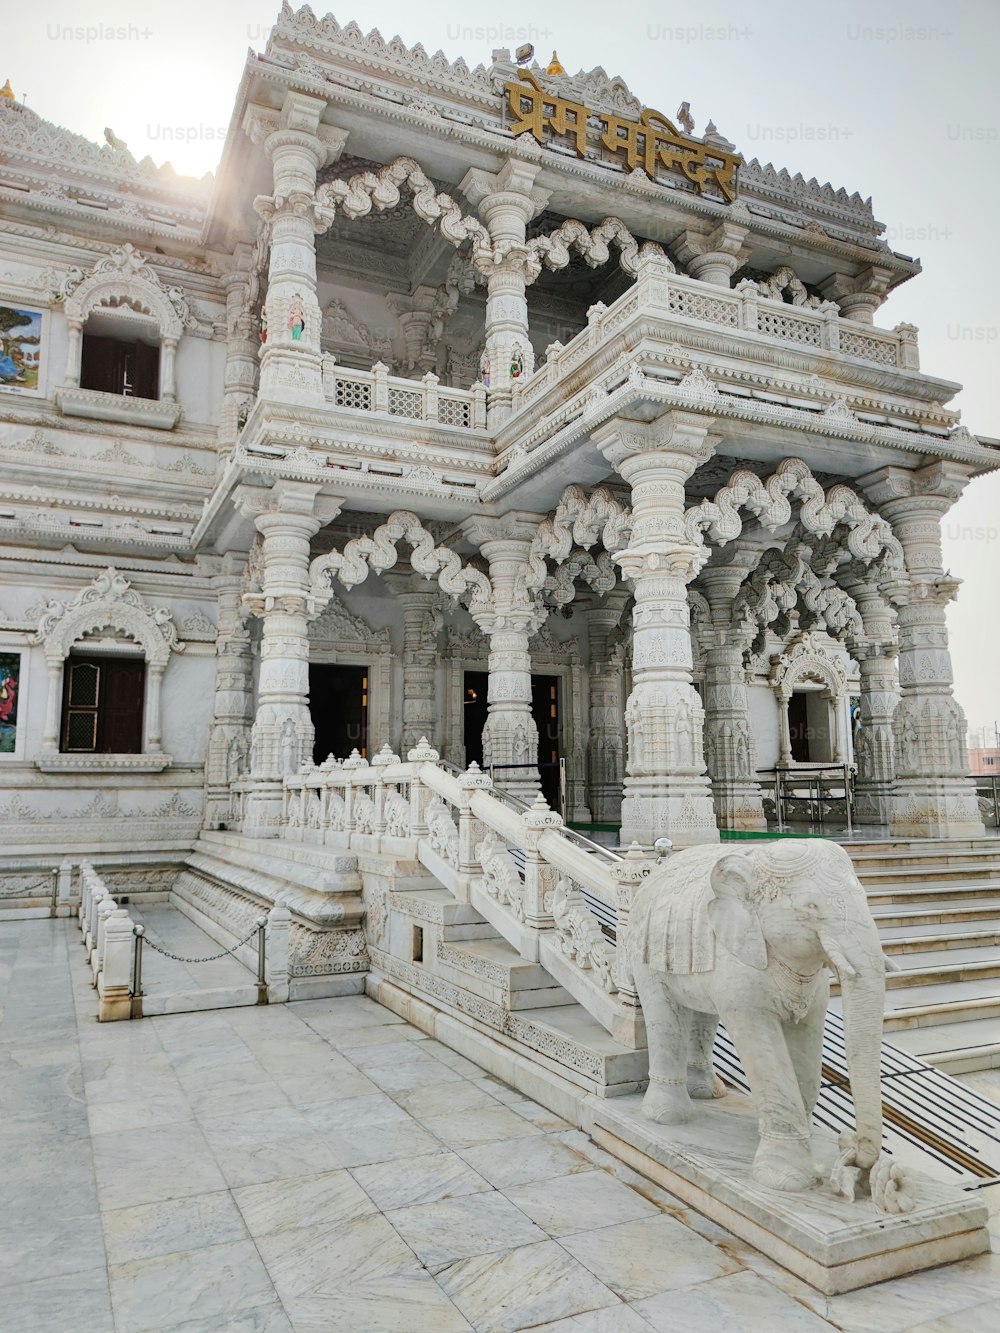 a white elephant statue in front of a building